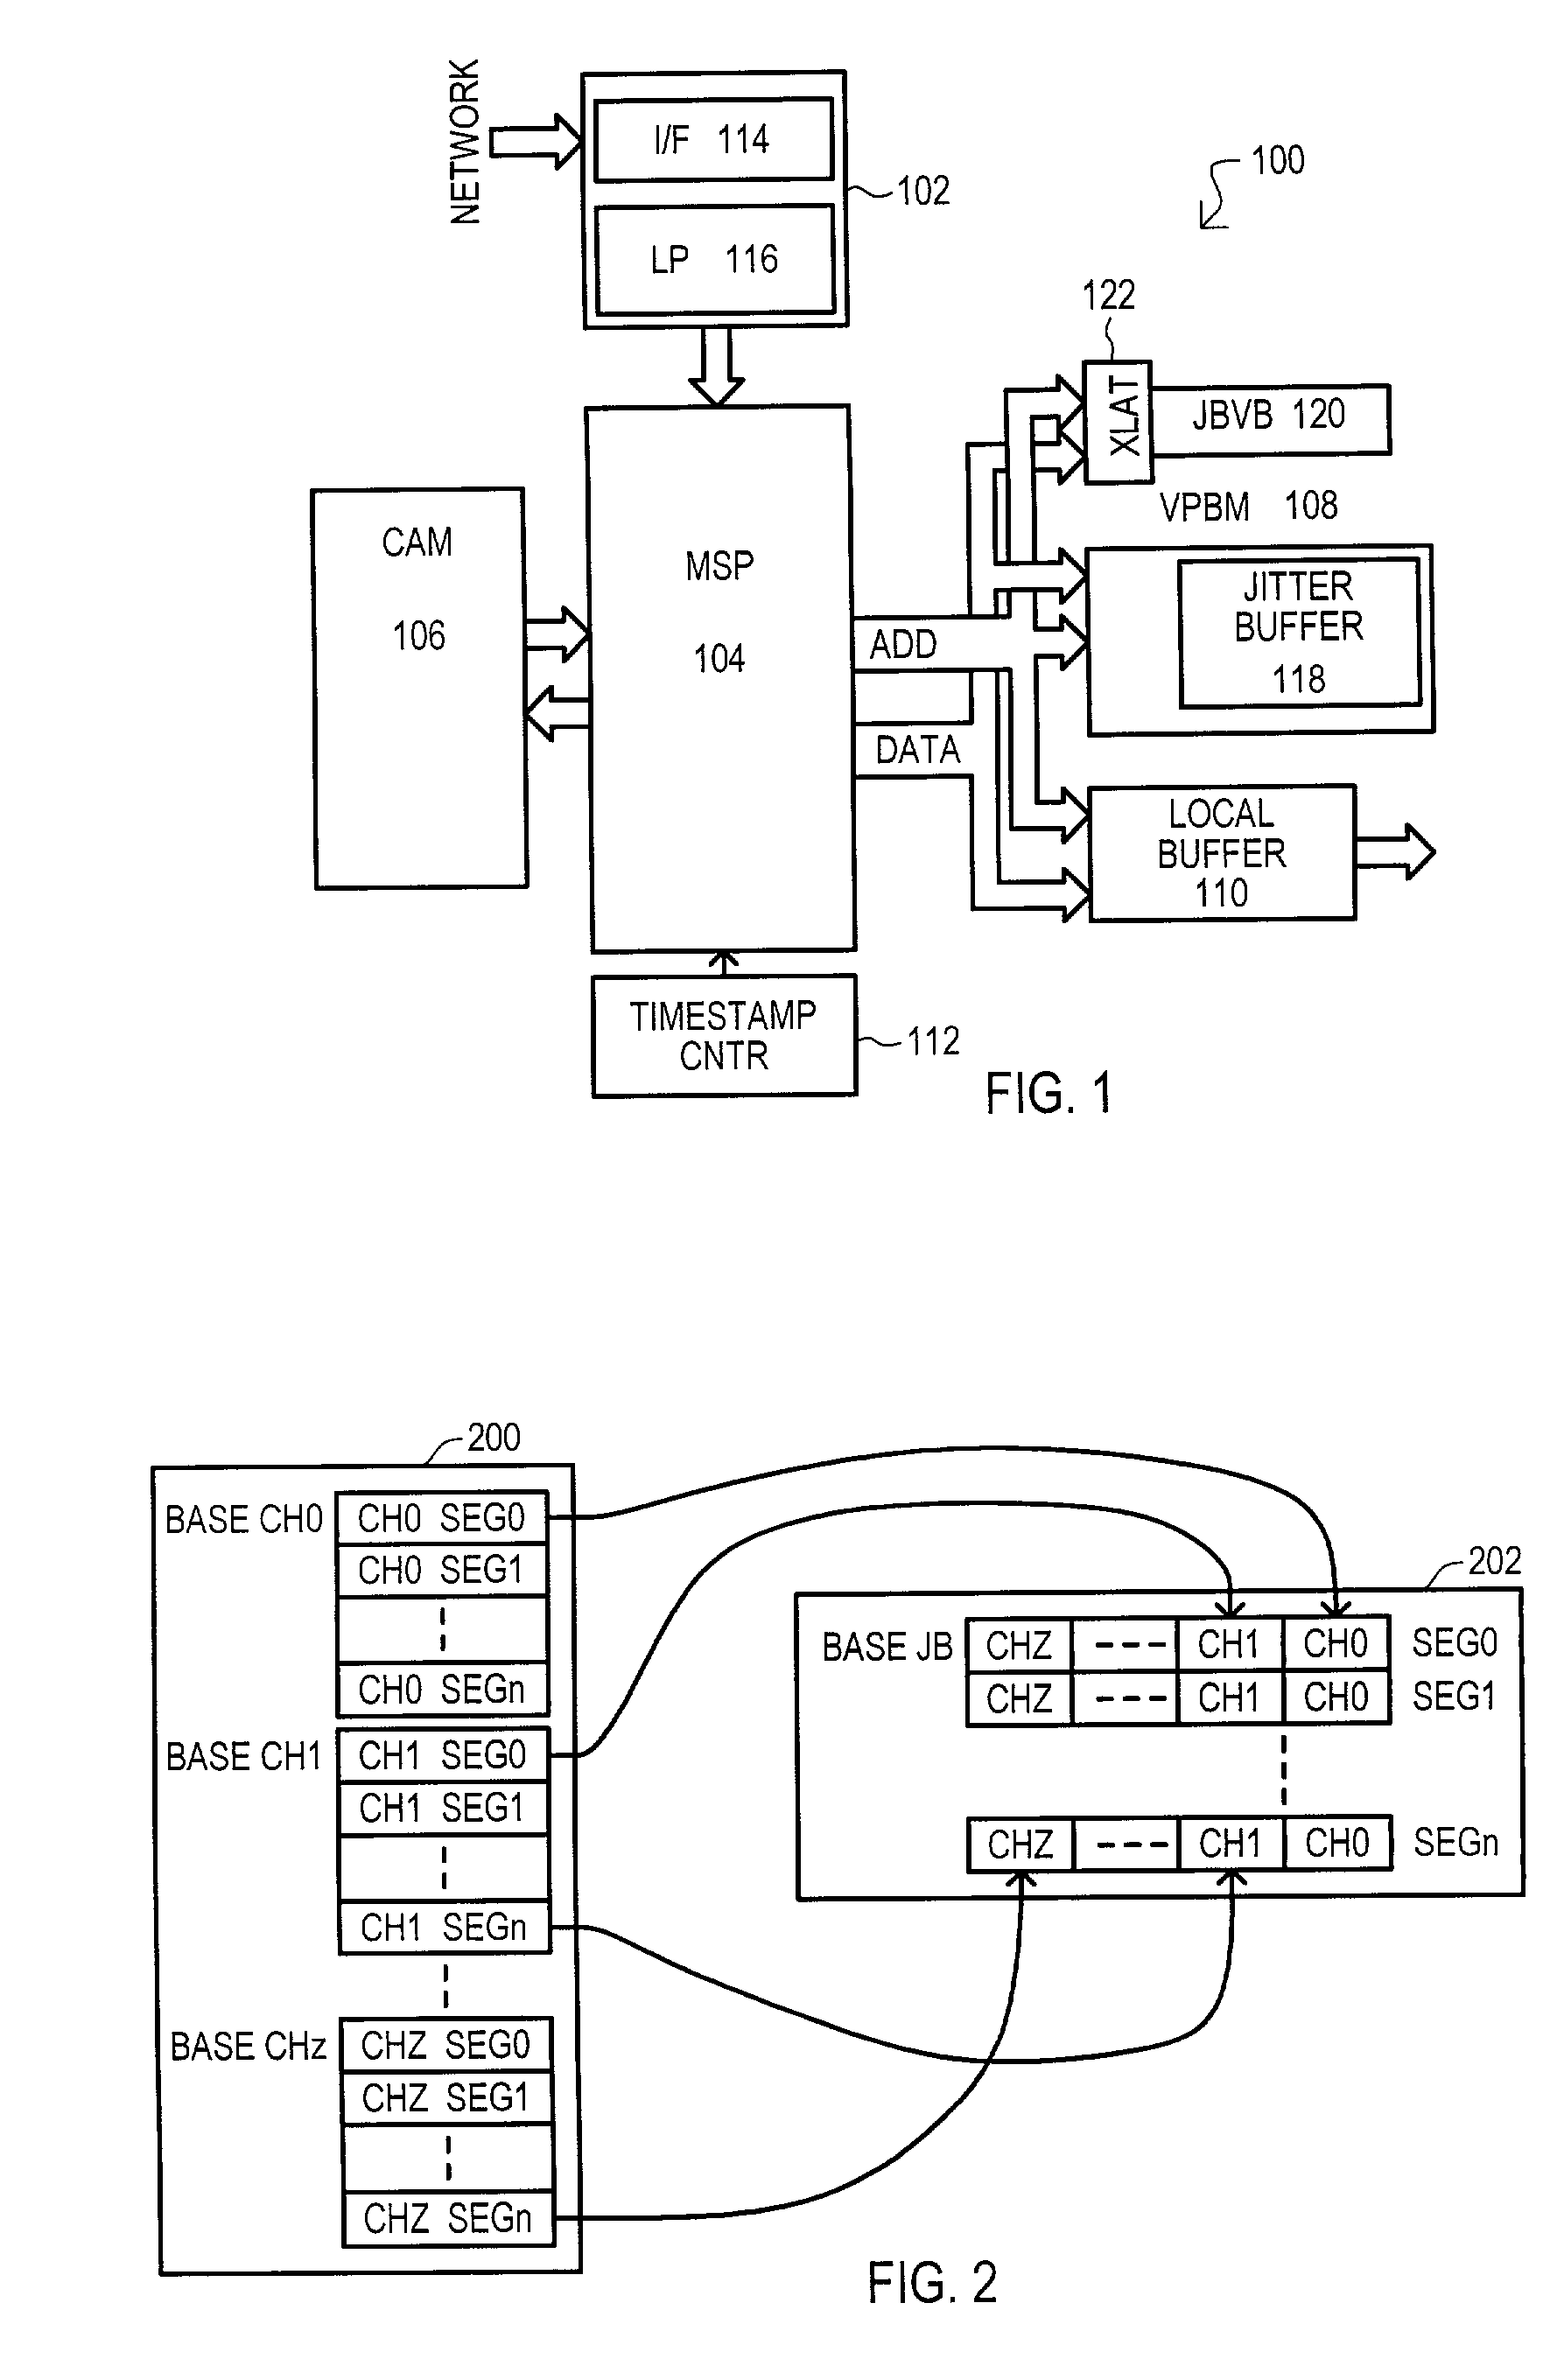 Jitter buffer state management system for data transmitted between synchronous and asynchronous data networks